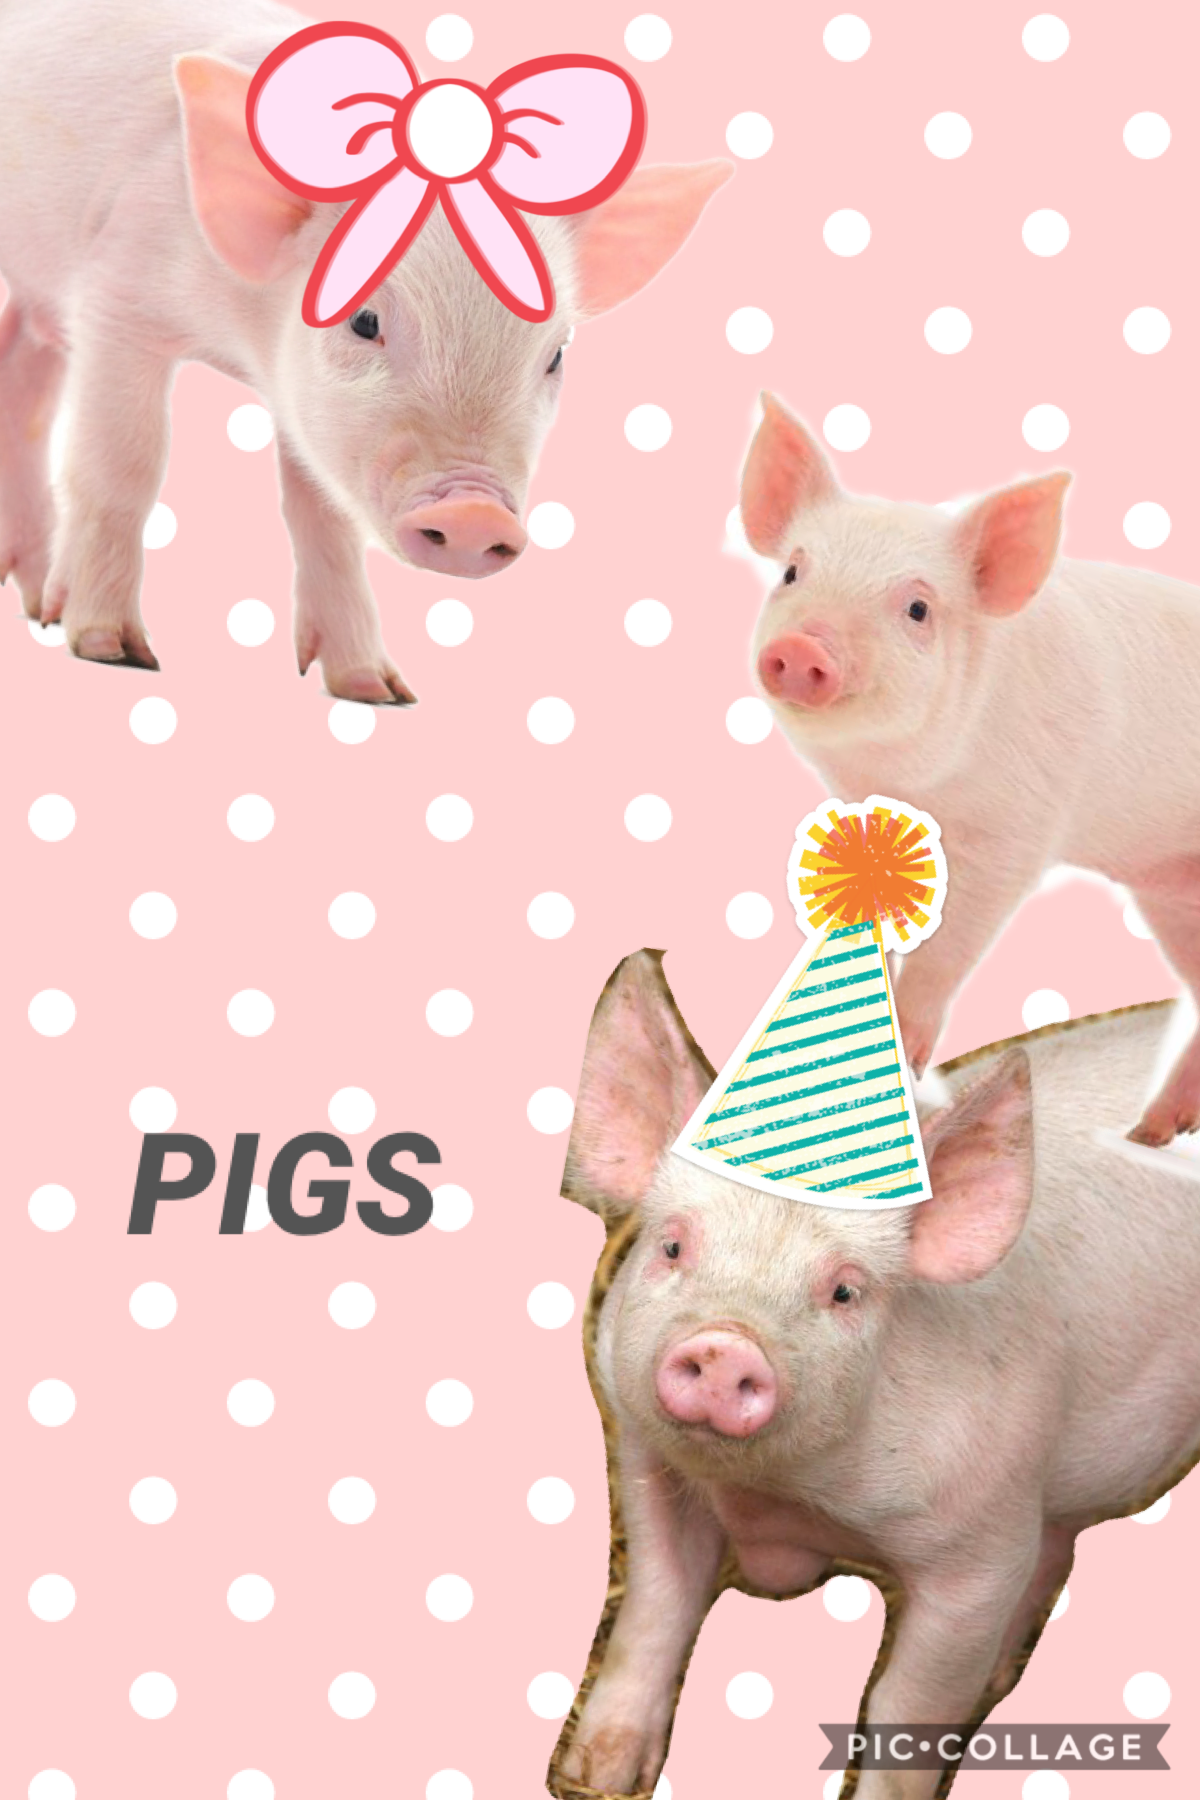 For Pigpop